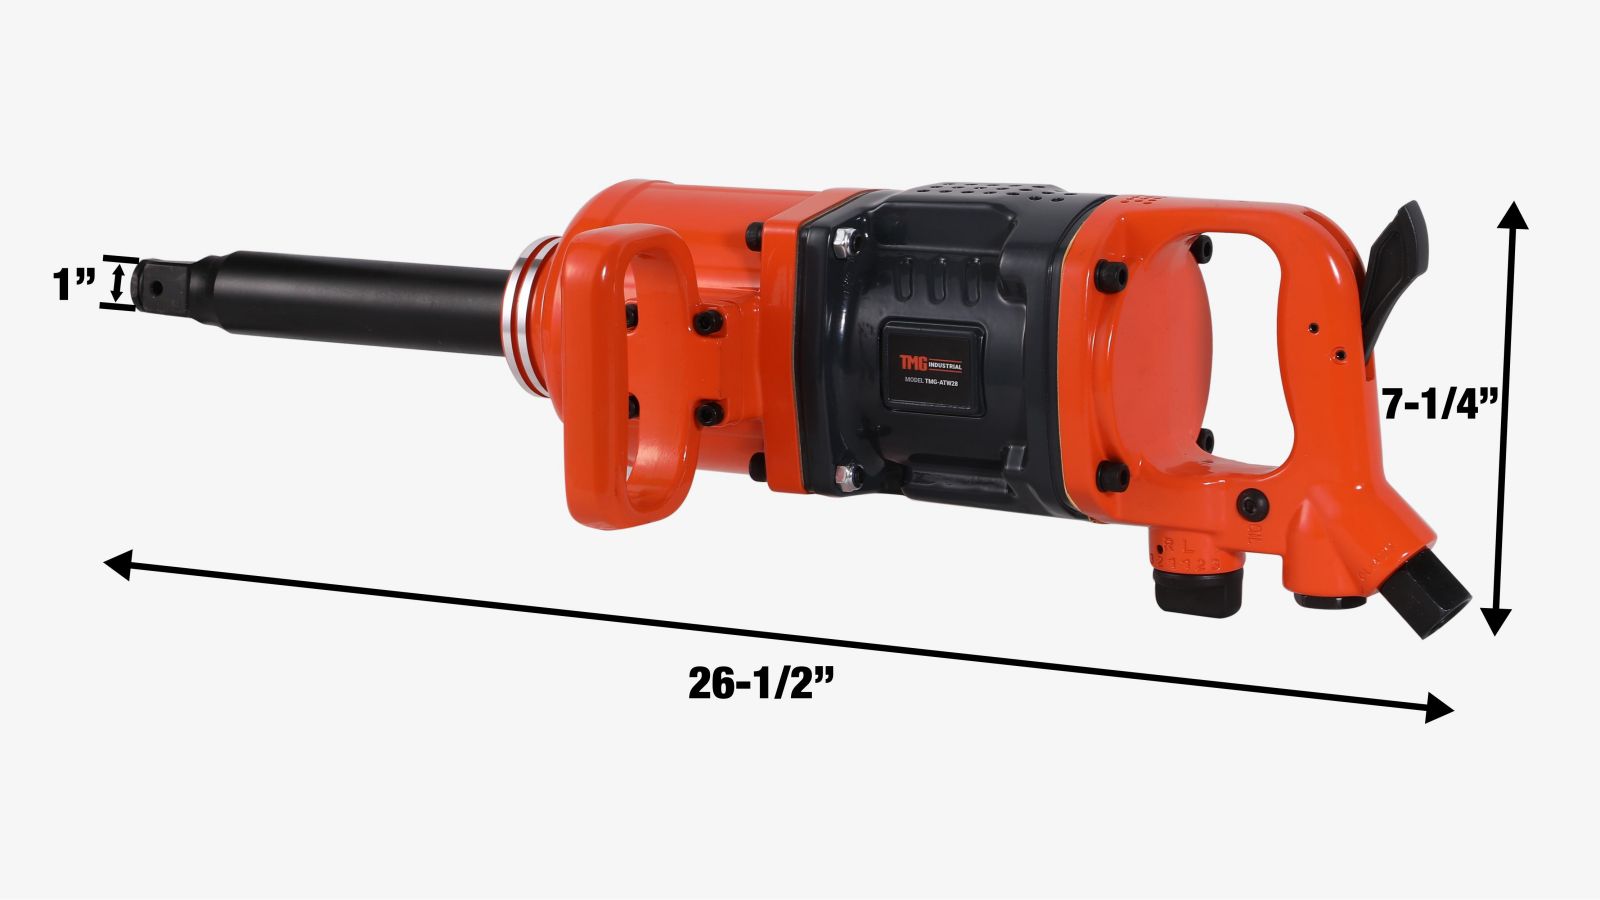 TMG Industrial 1” Drive 2815 ft-lb Pneumatic Extended Impact Wrench Hammer, Aluminum Alloy Housing, 8” Anvil, 175 PSI, TMG-ATW28-specifications-image